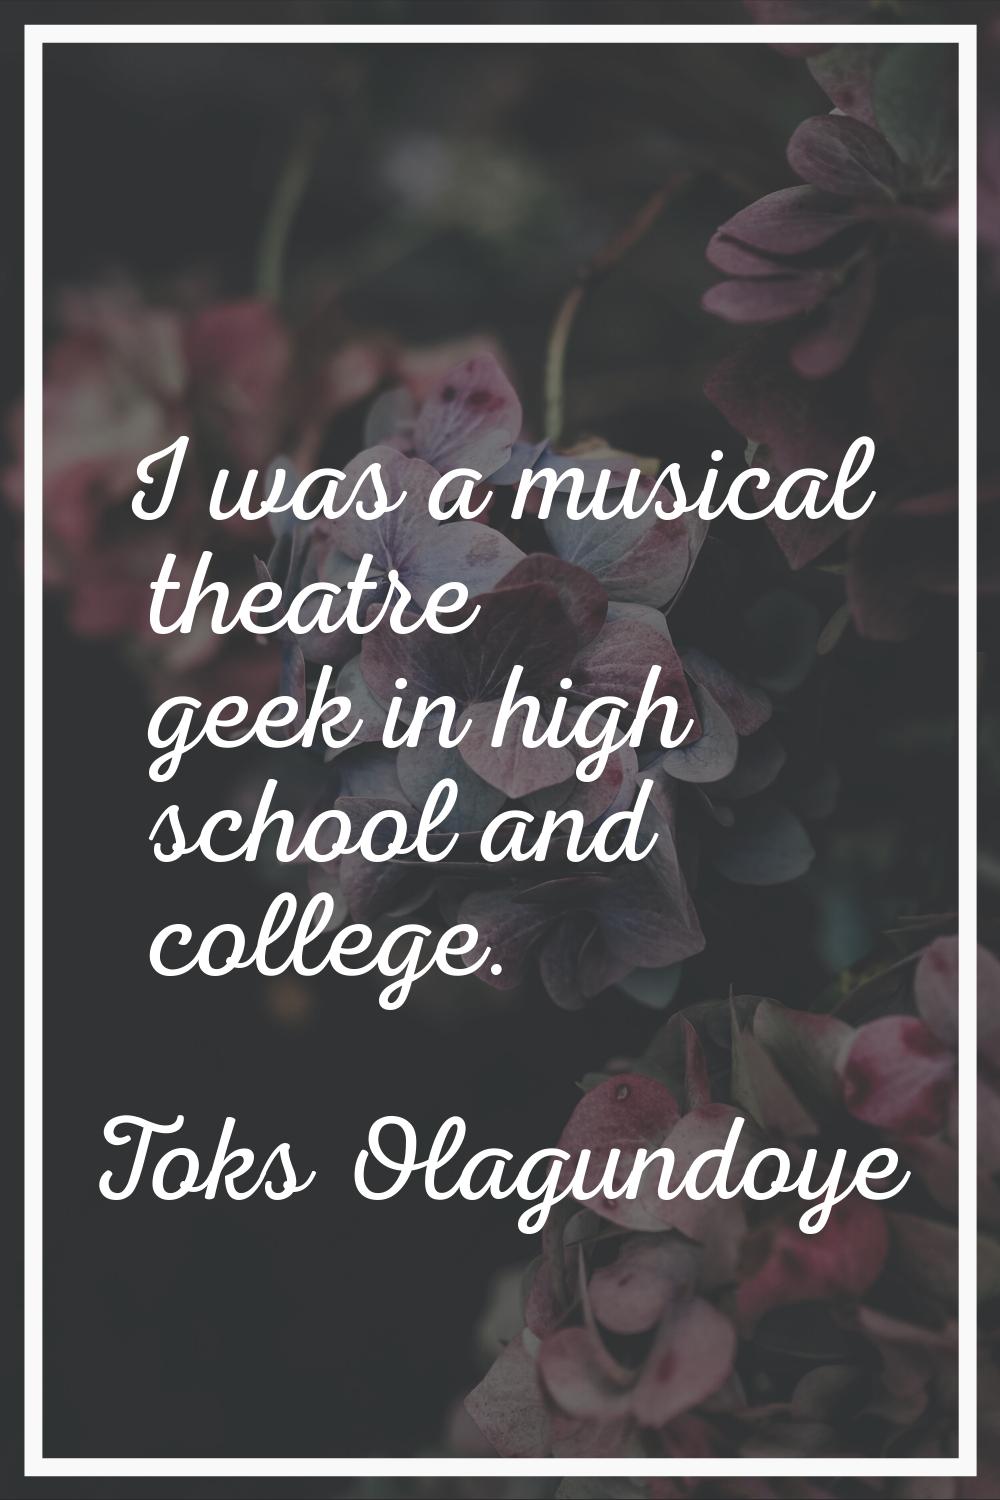 I was a musical theatre geek in high school and college.